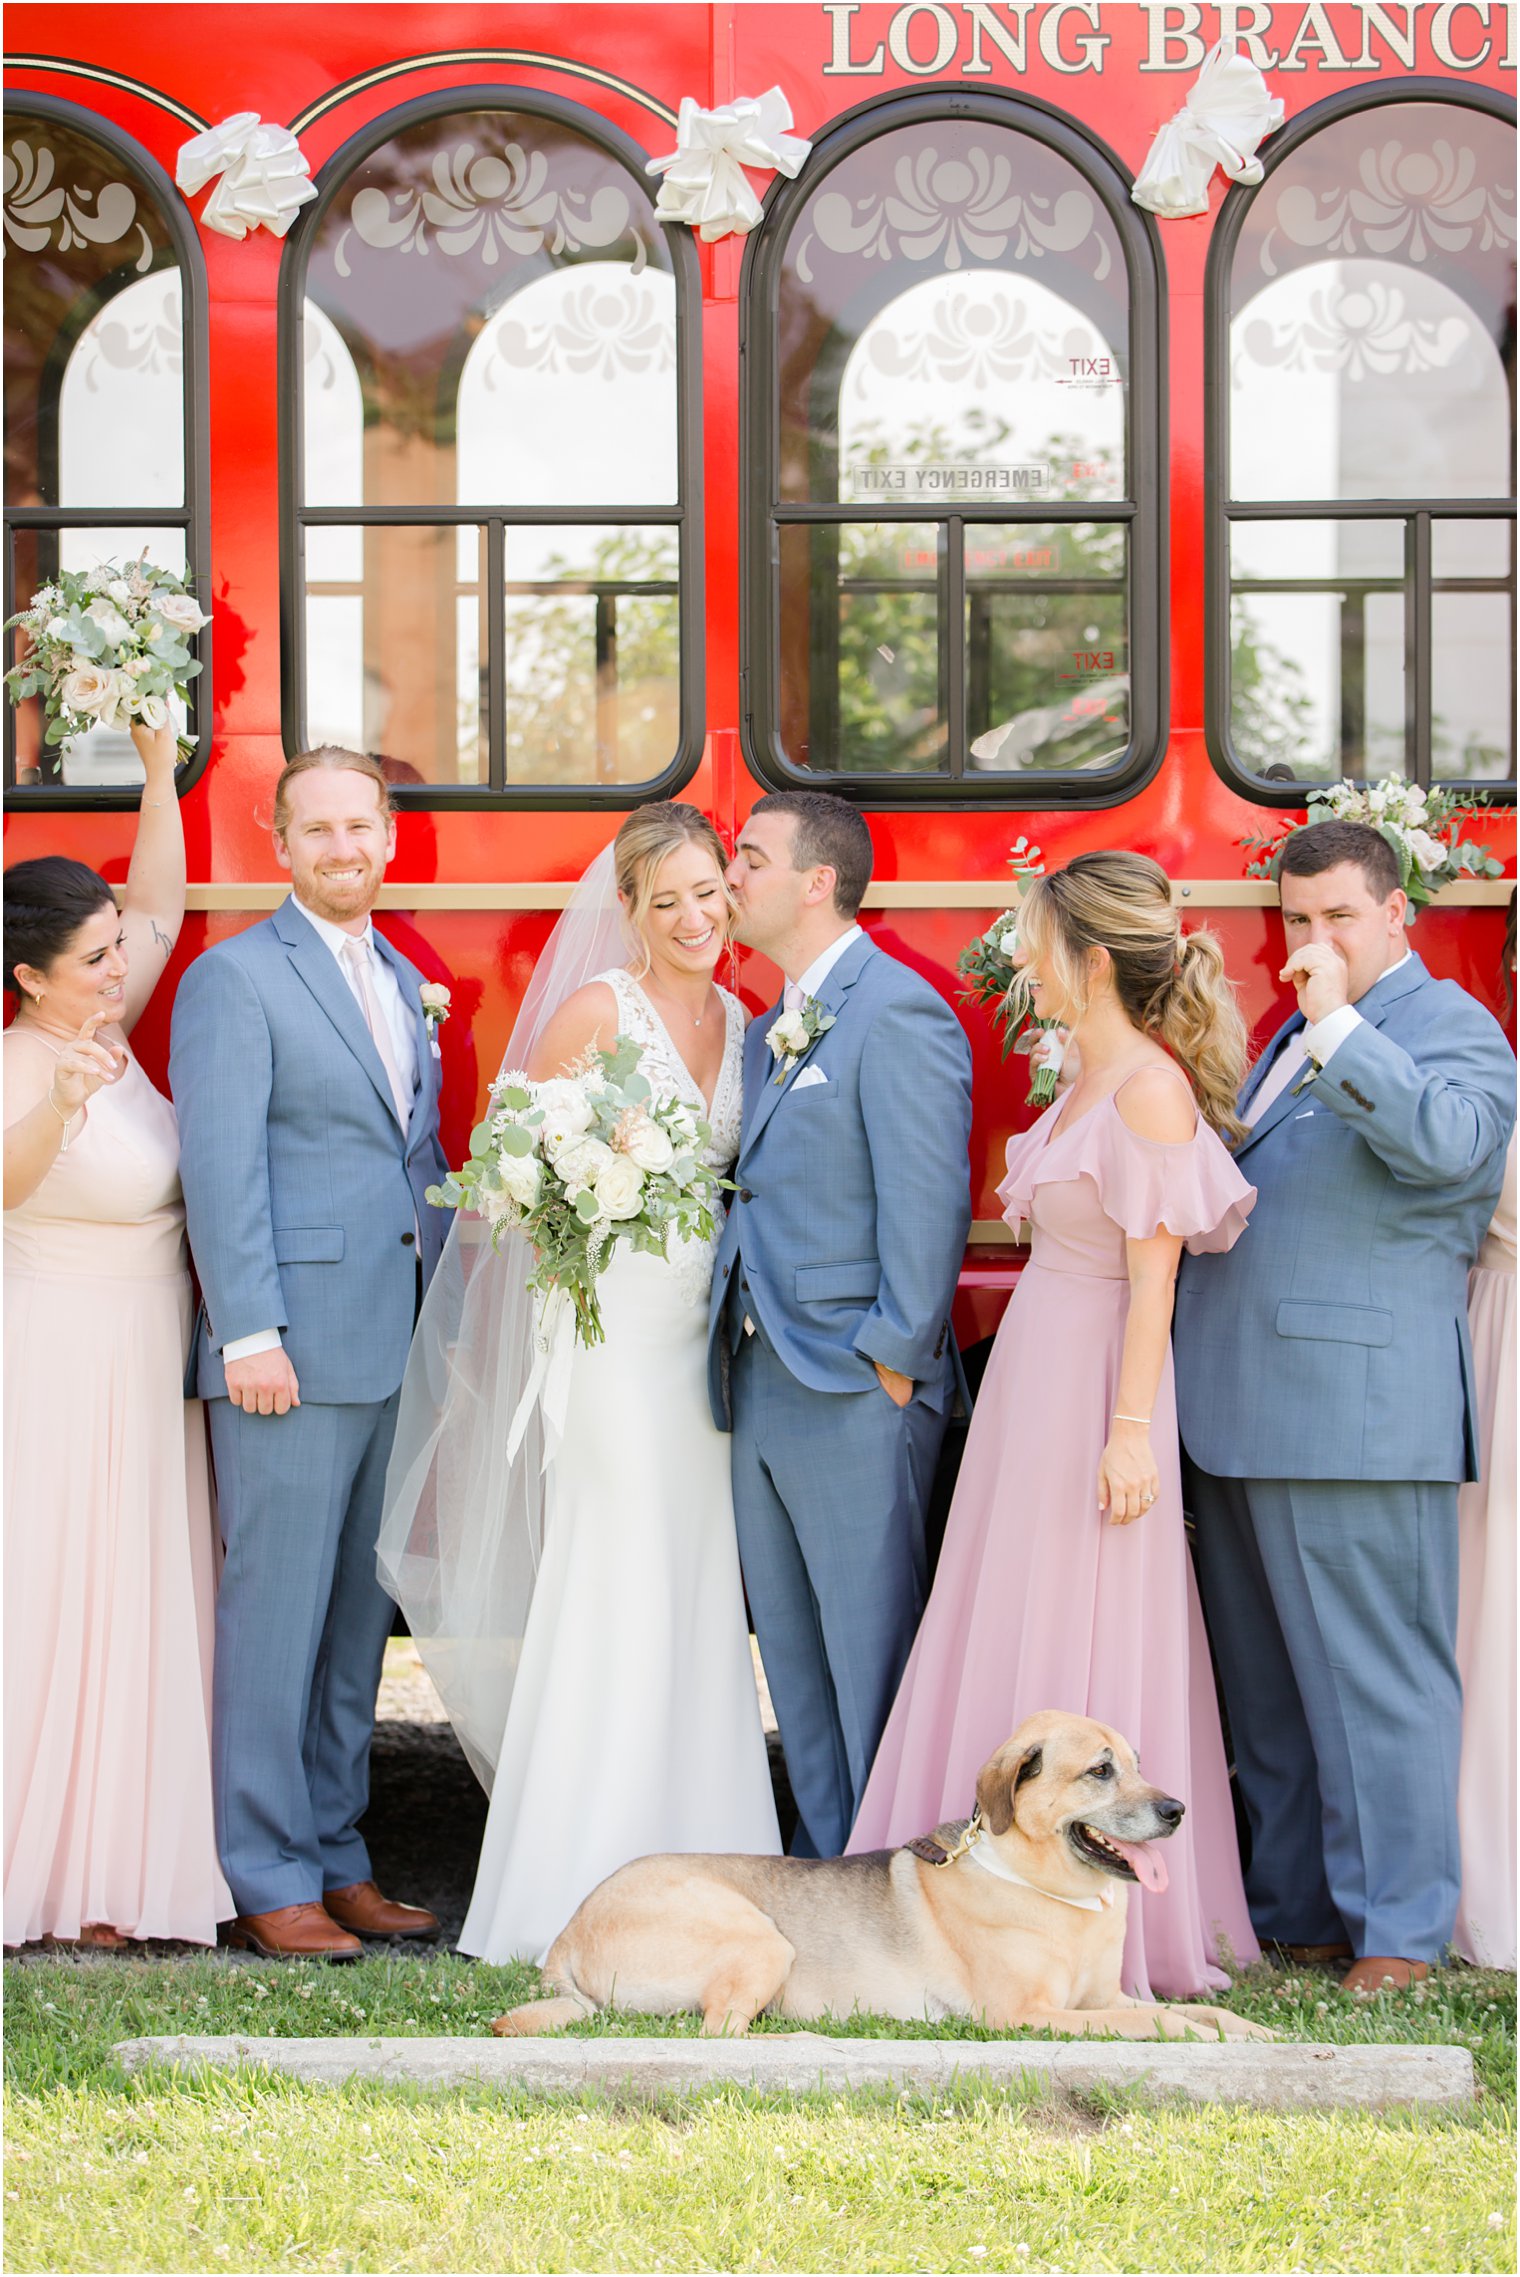 Long Branch Trolley Company transports wedding party with Idalia Photography